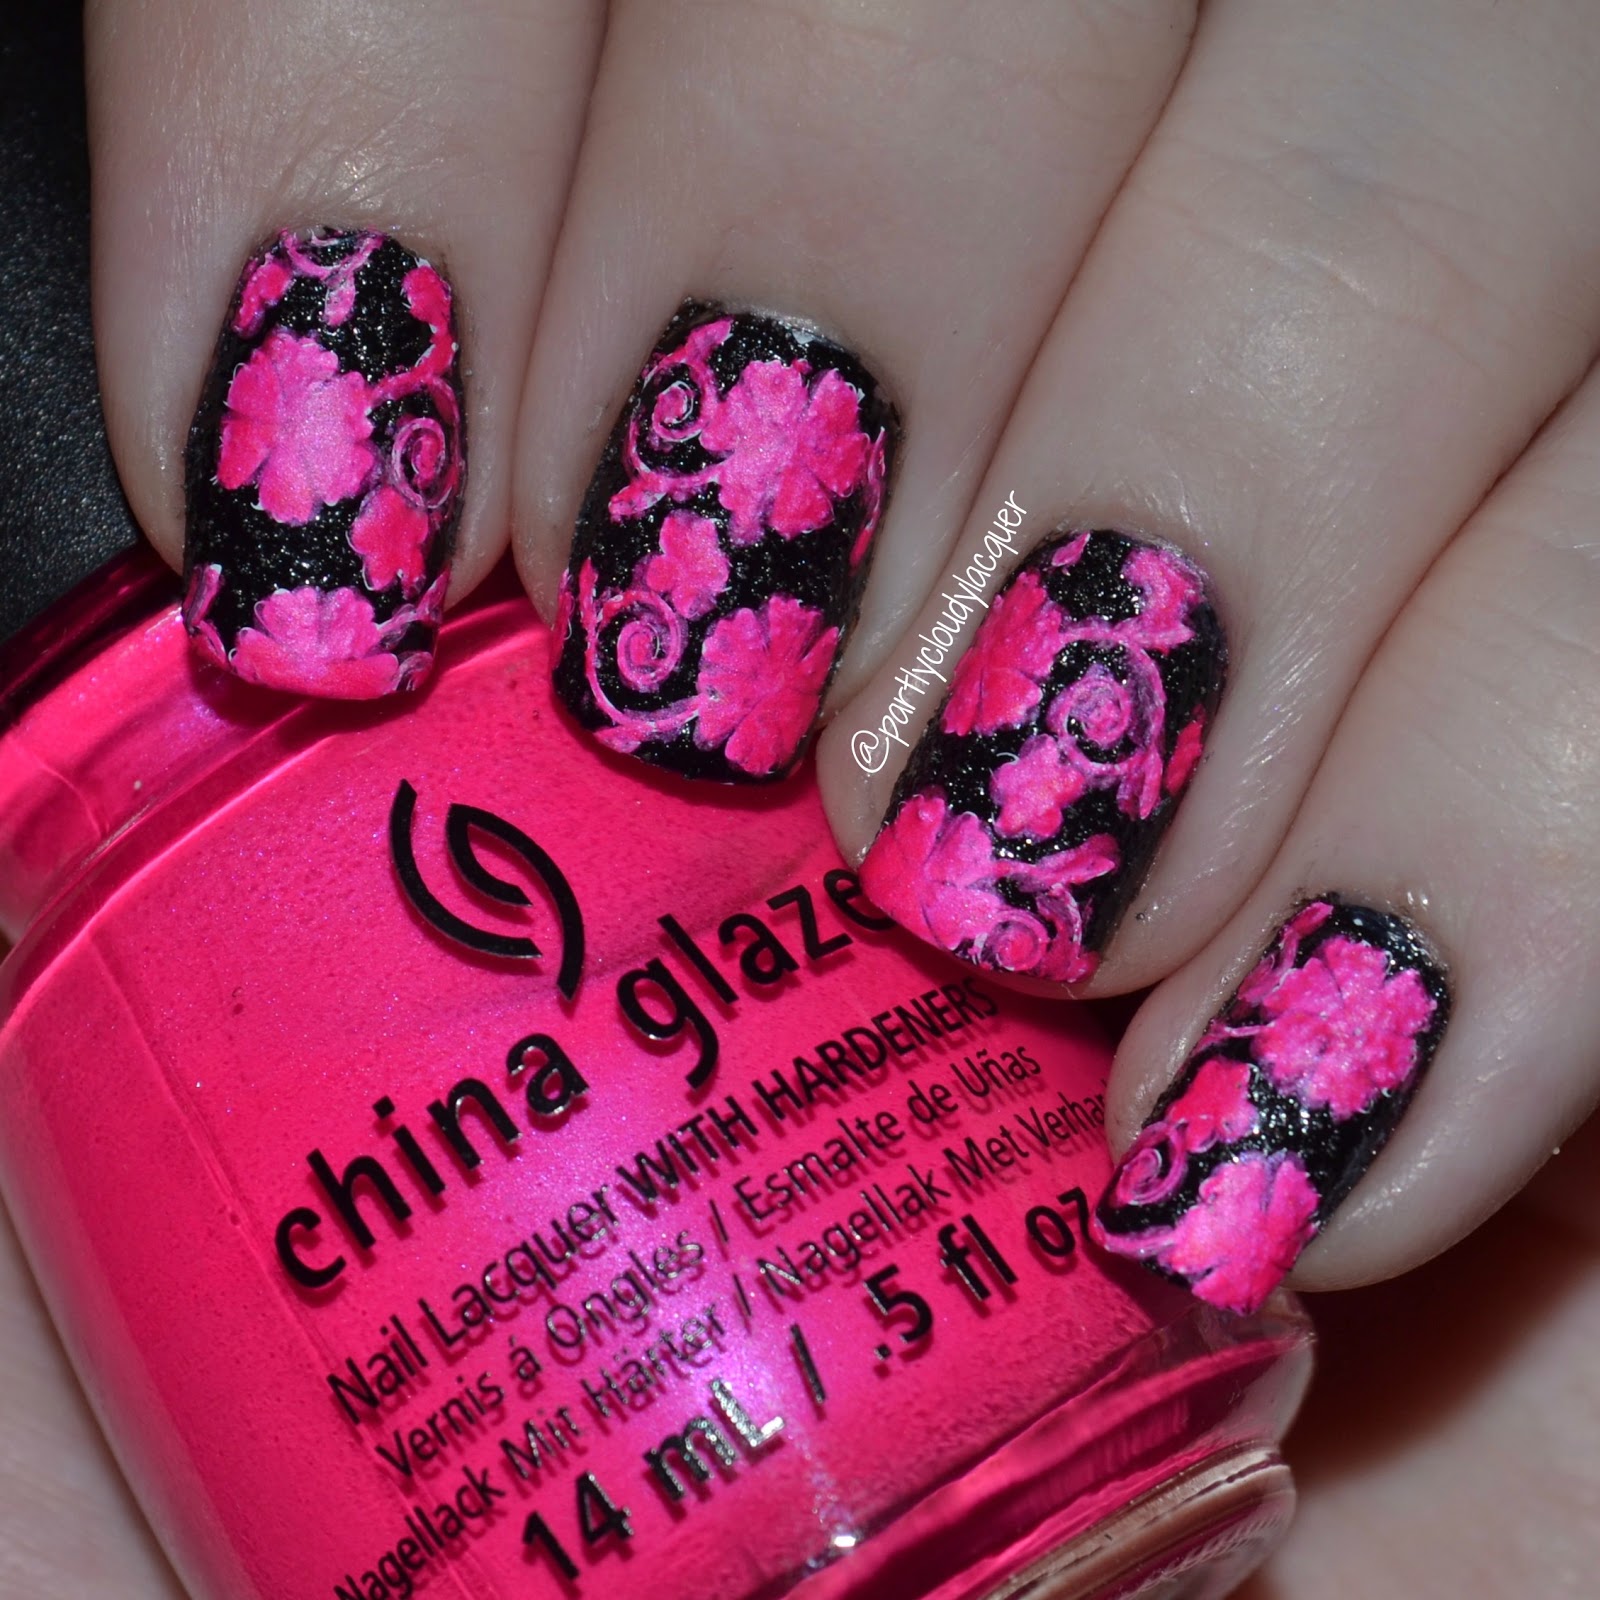 Partly Cloudy With a Chance of Lacquer: Neon Pink and Black Stamped Nails